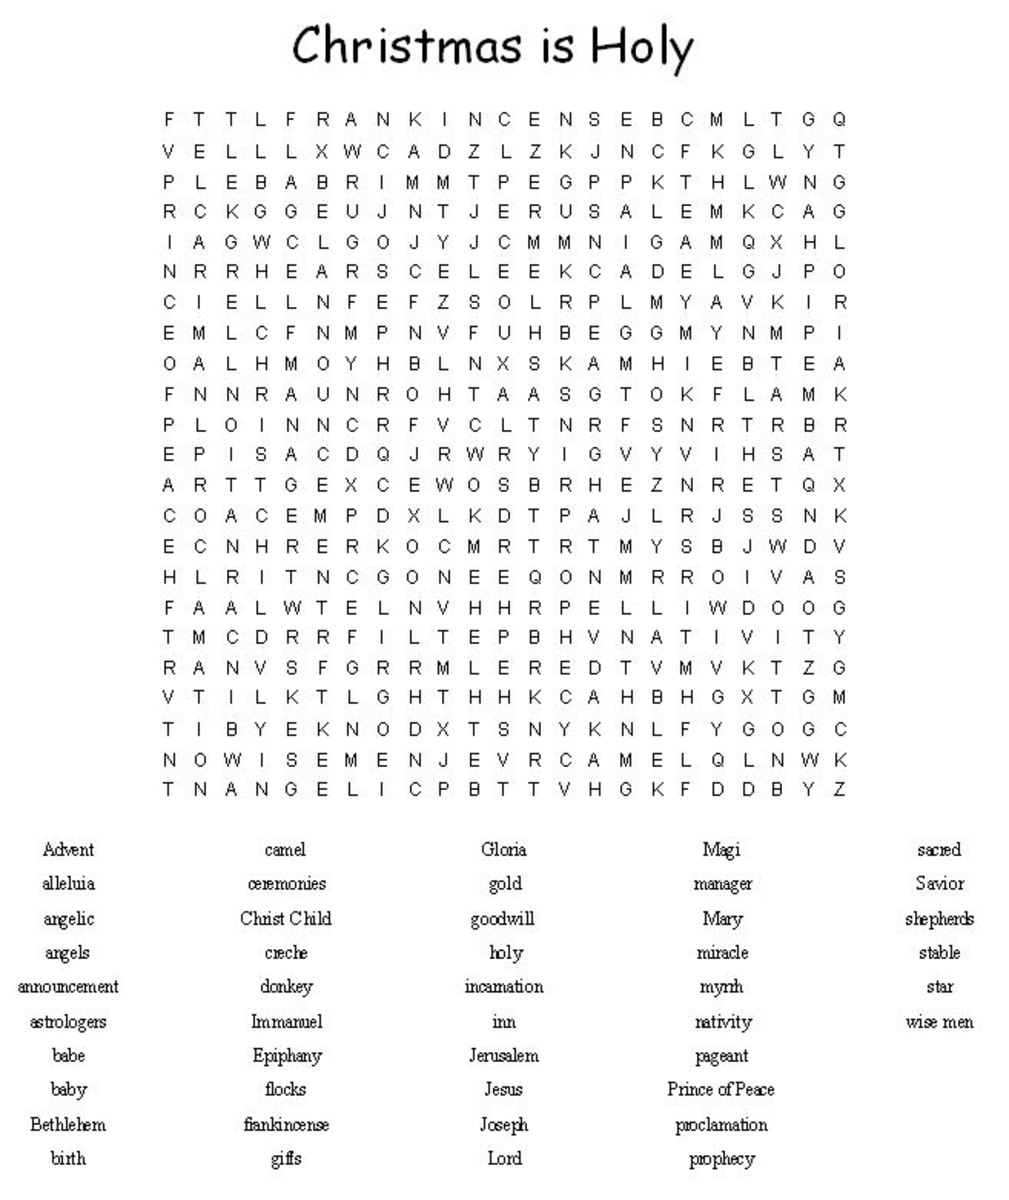 check-out-this-fun-free-christian-christmas-word-search-free-for-use